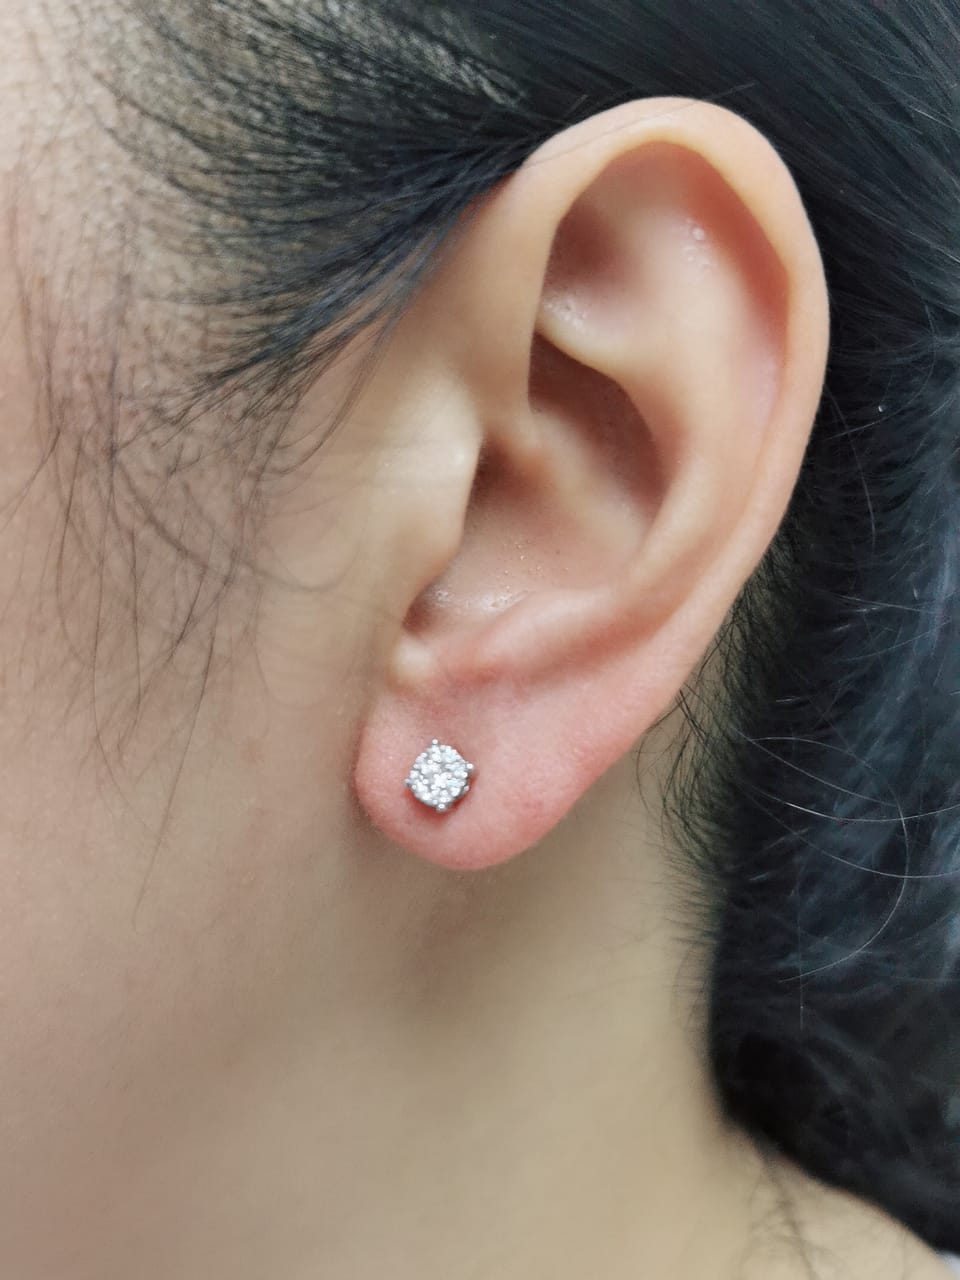 These 18k White Gold Diamond Cluster Stud Earrings Are Perfect For Any Occasion. Their Petite Size Makes Them Ideal For Gifting, While Their Sparkling Diamond Clusters Make Them A Timeless Choice For Any Jewelry Collection. With Classic Sophistication, These Earrings Make An Adorable Addition To Your Earring Stack.